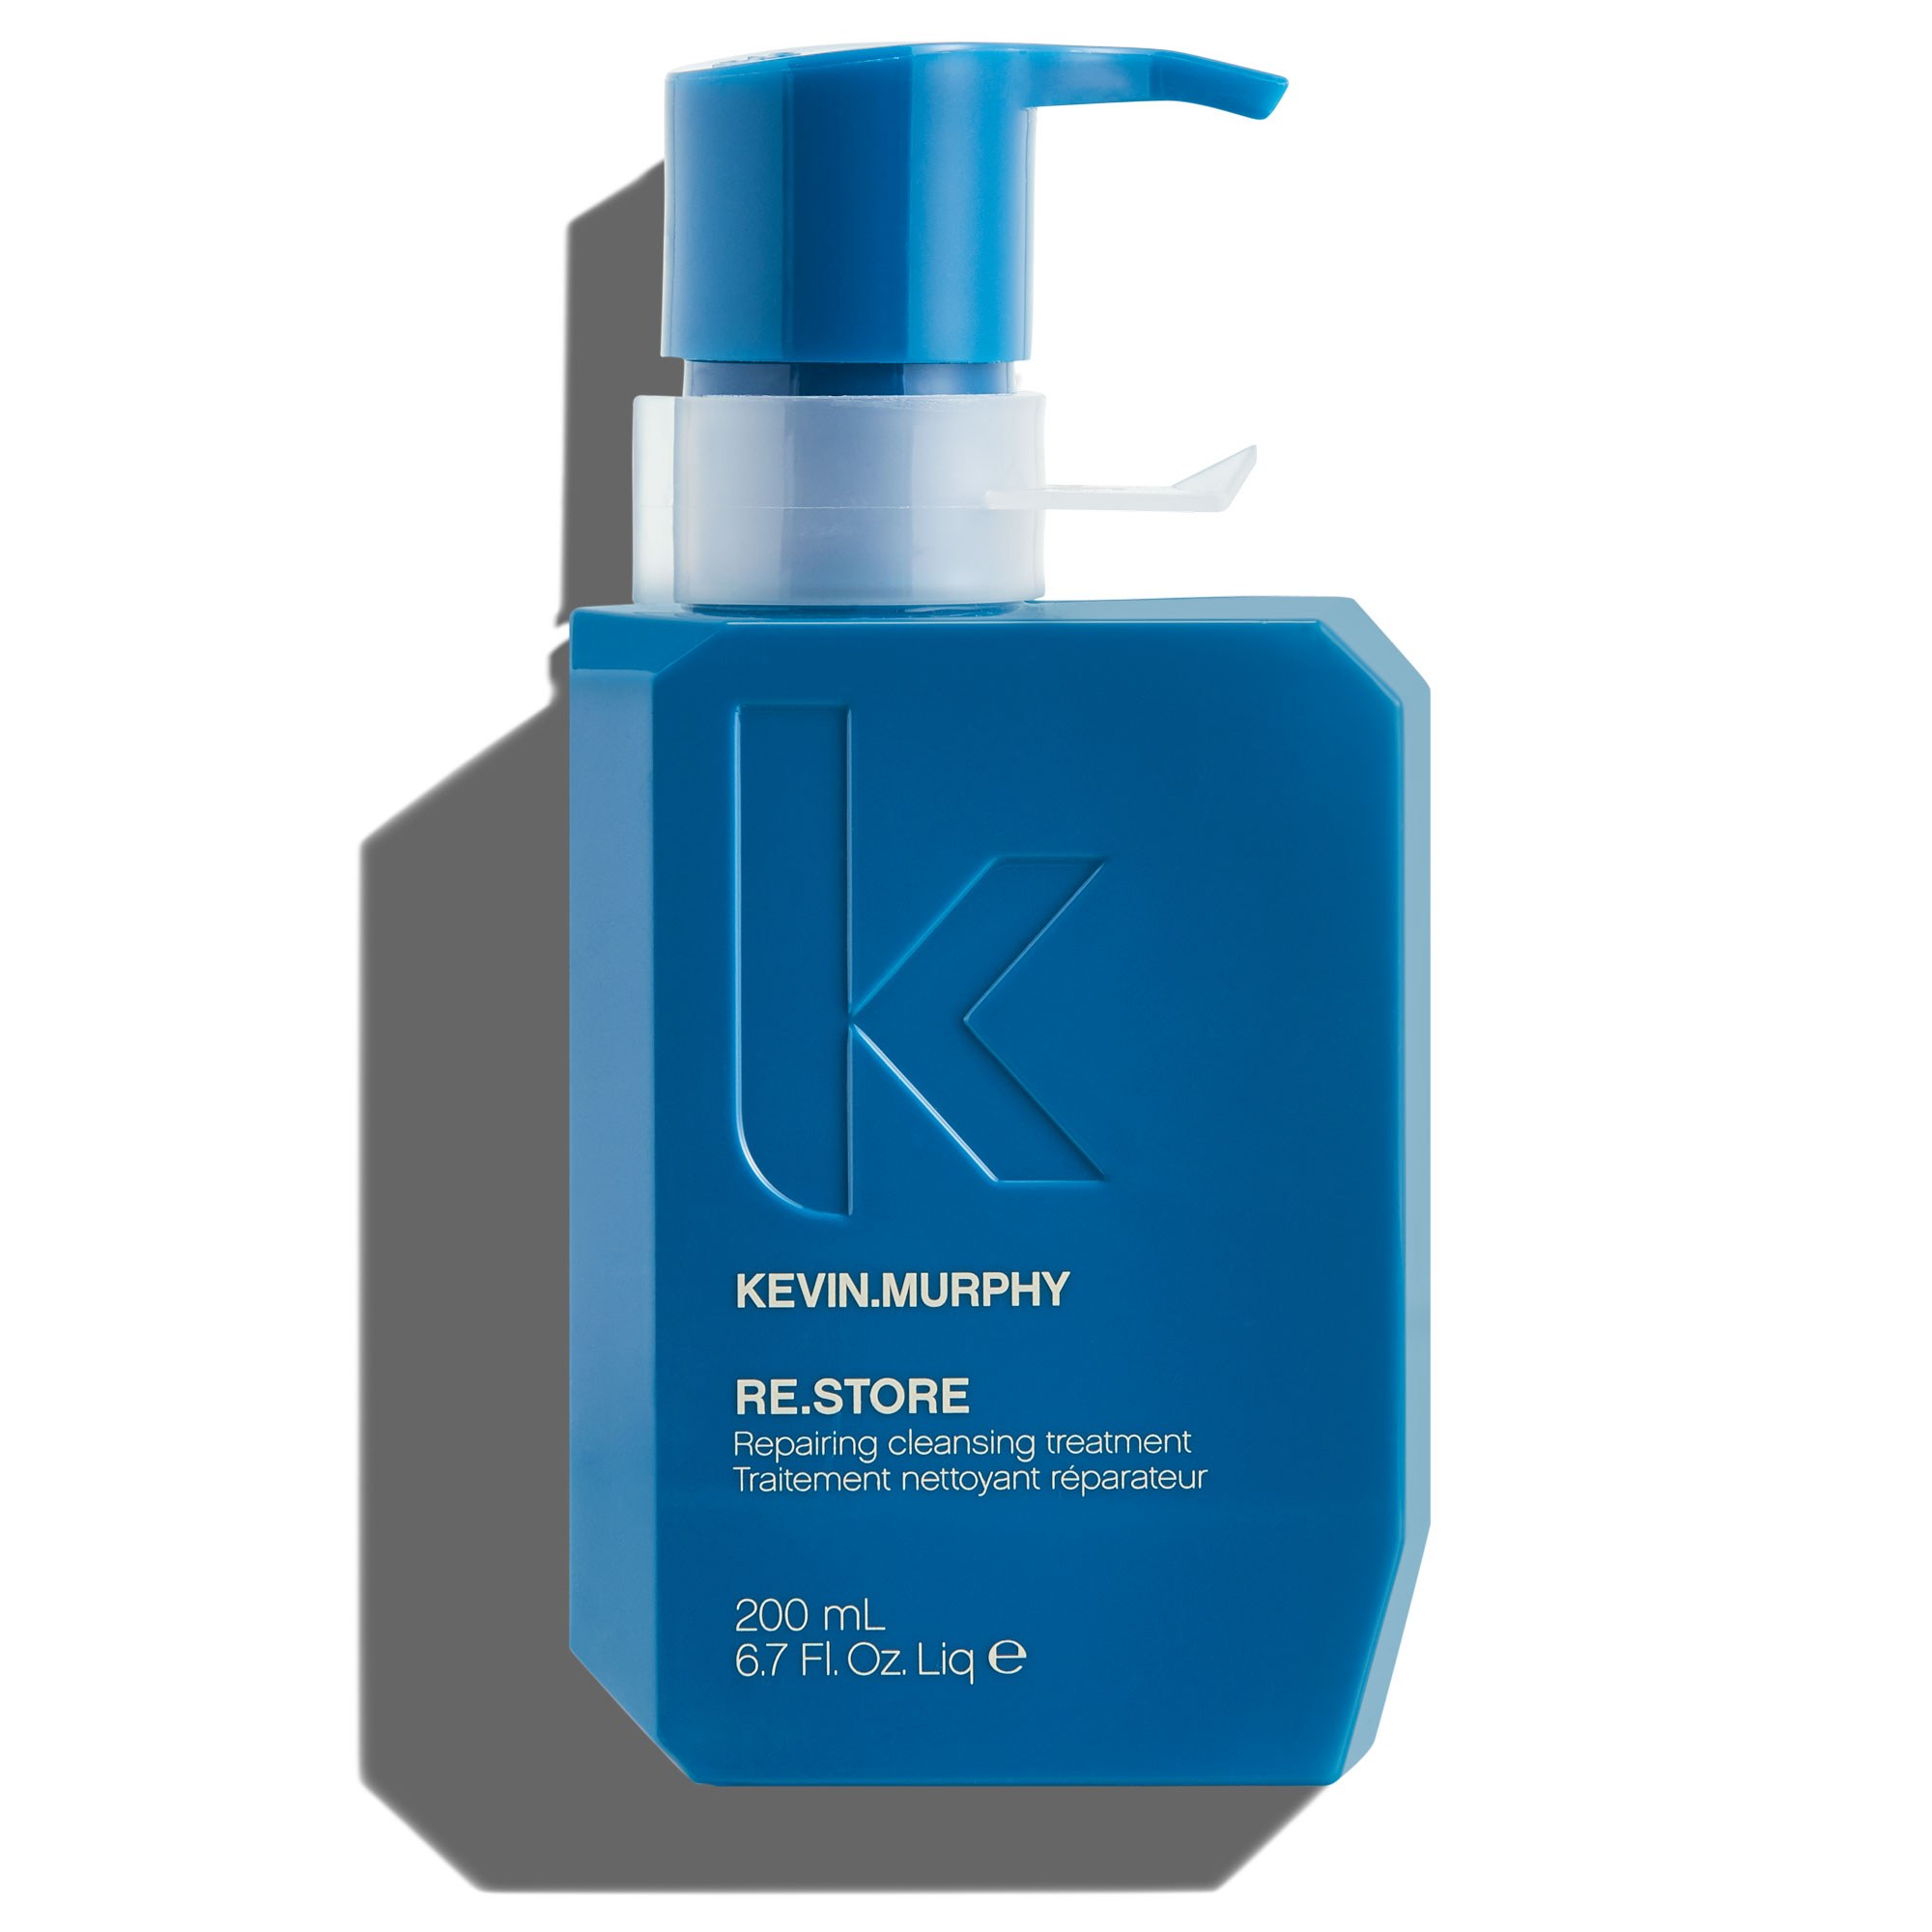 KEVIN.MURPHY RE.STORE 6.7oz